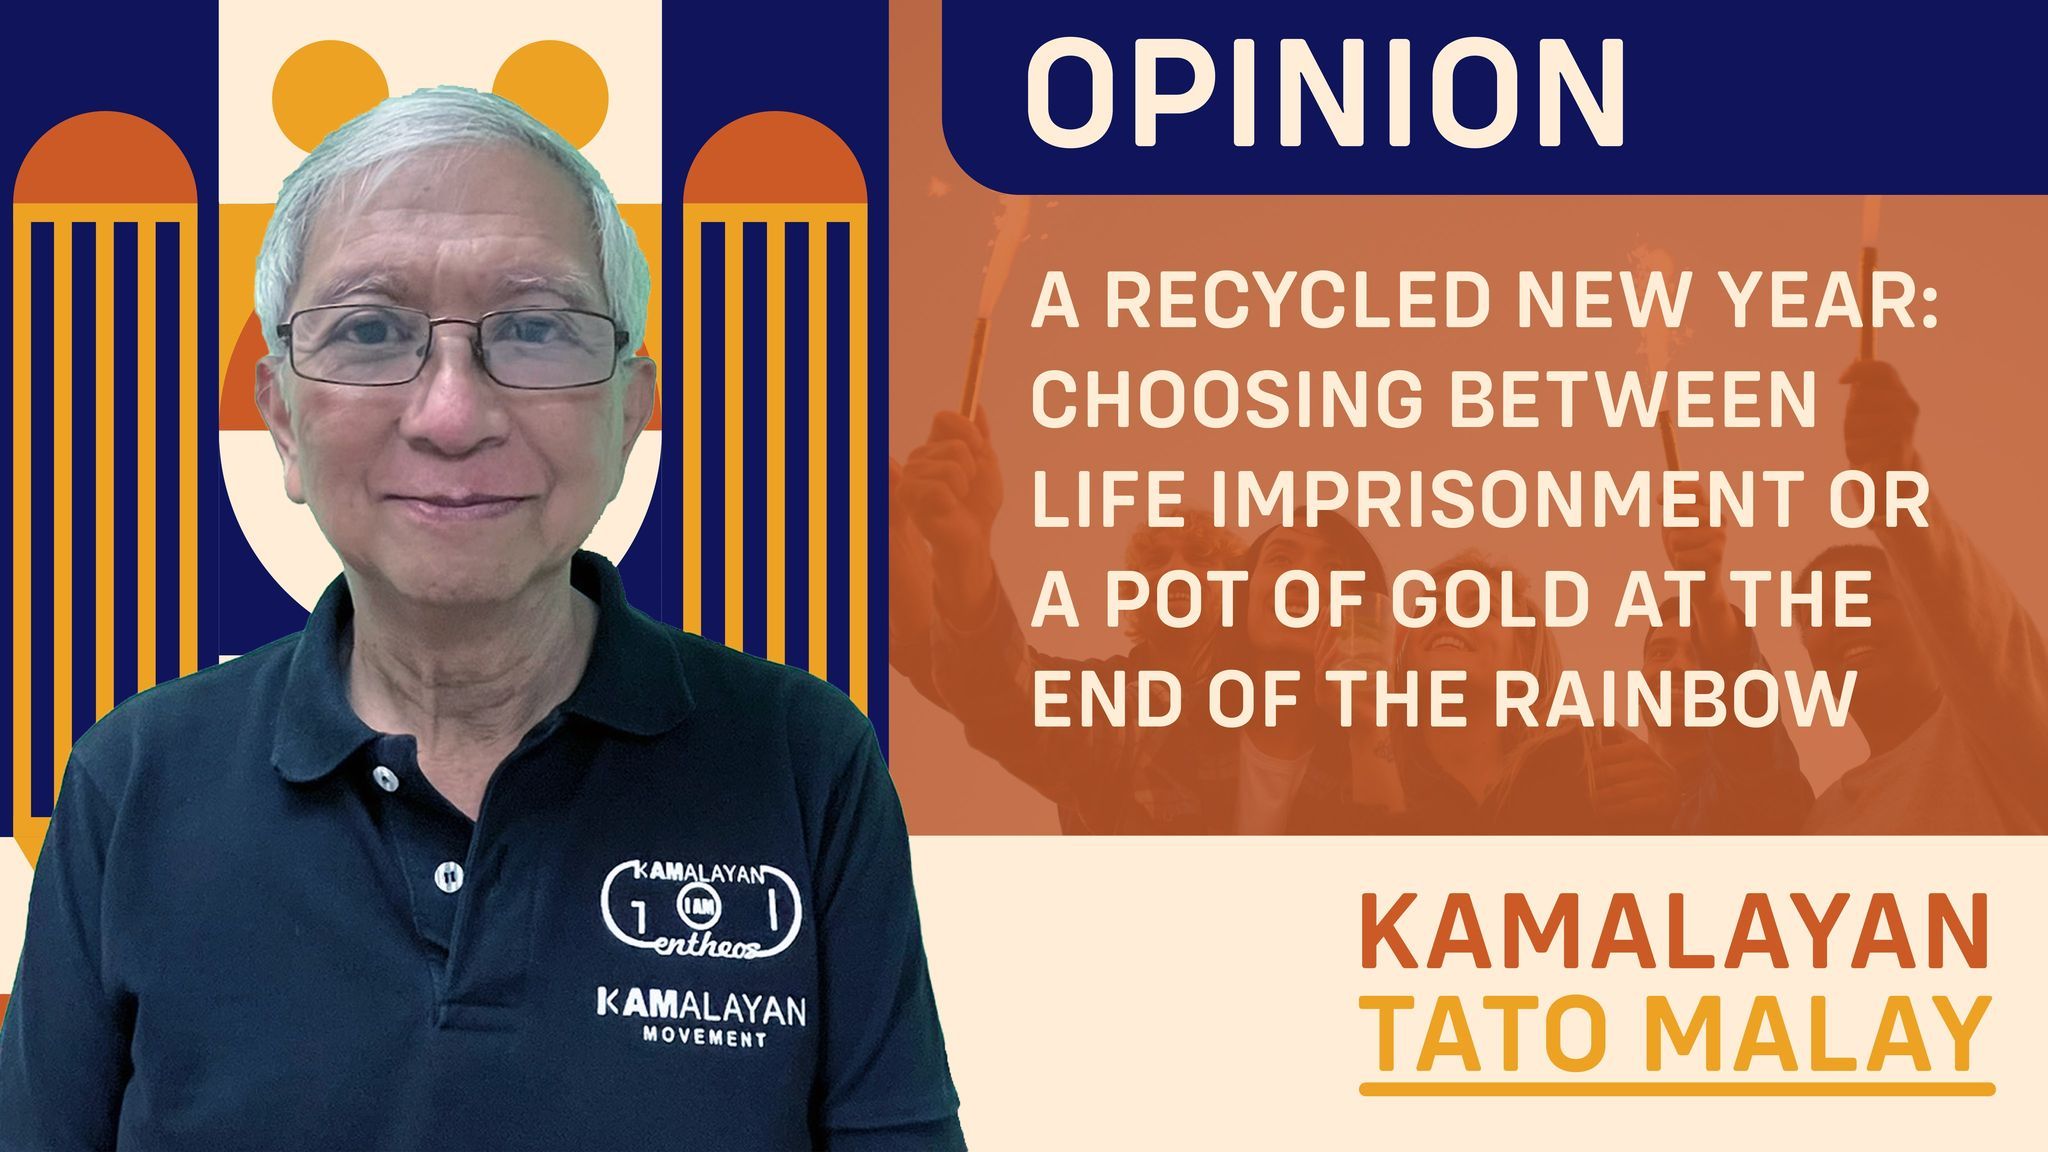 A RECYCLED NEW YEAR: CHOOSING BETWEEN LIFE IMPRISONMENT OR A POT OF GOLD AT THE END OF THE RAINBOW